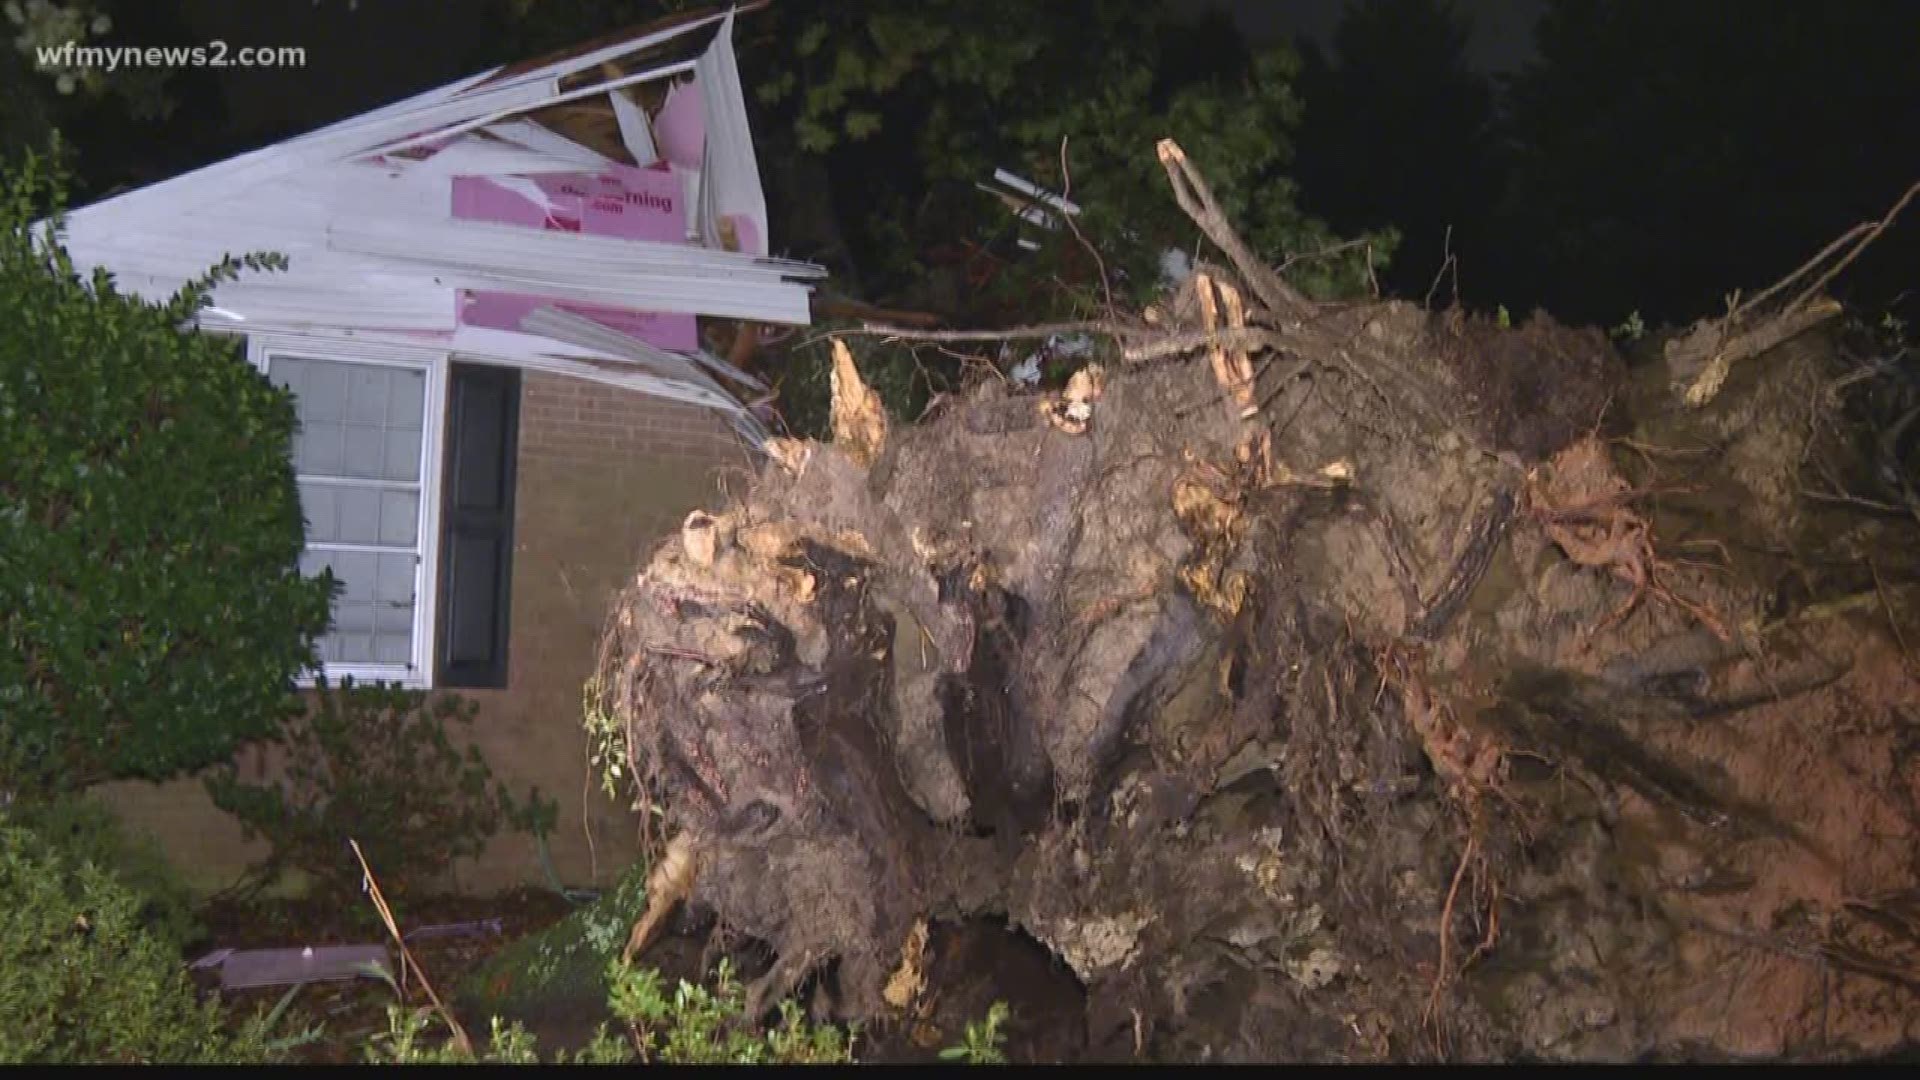 The couple who lives there pulled up to the house only to see a massive tree sticking out the side.